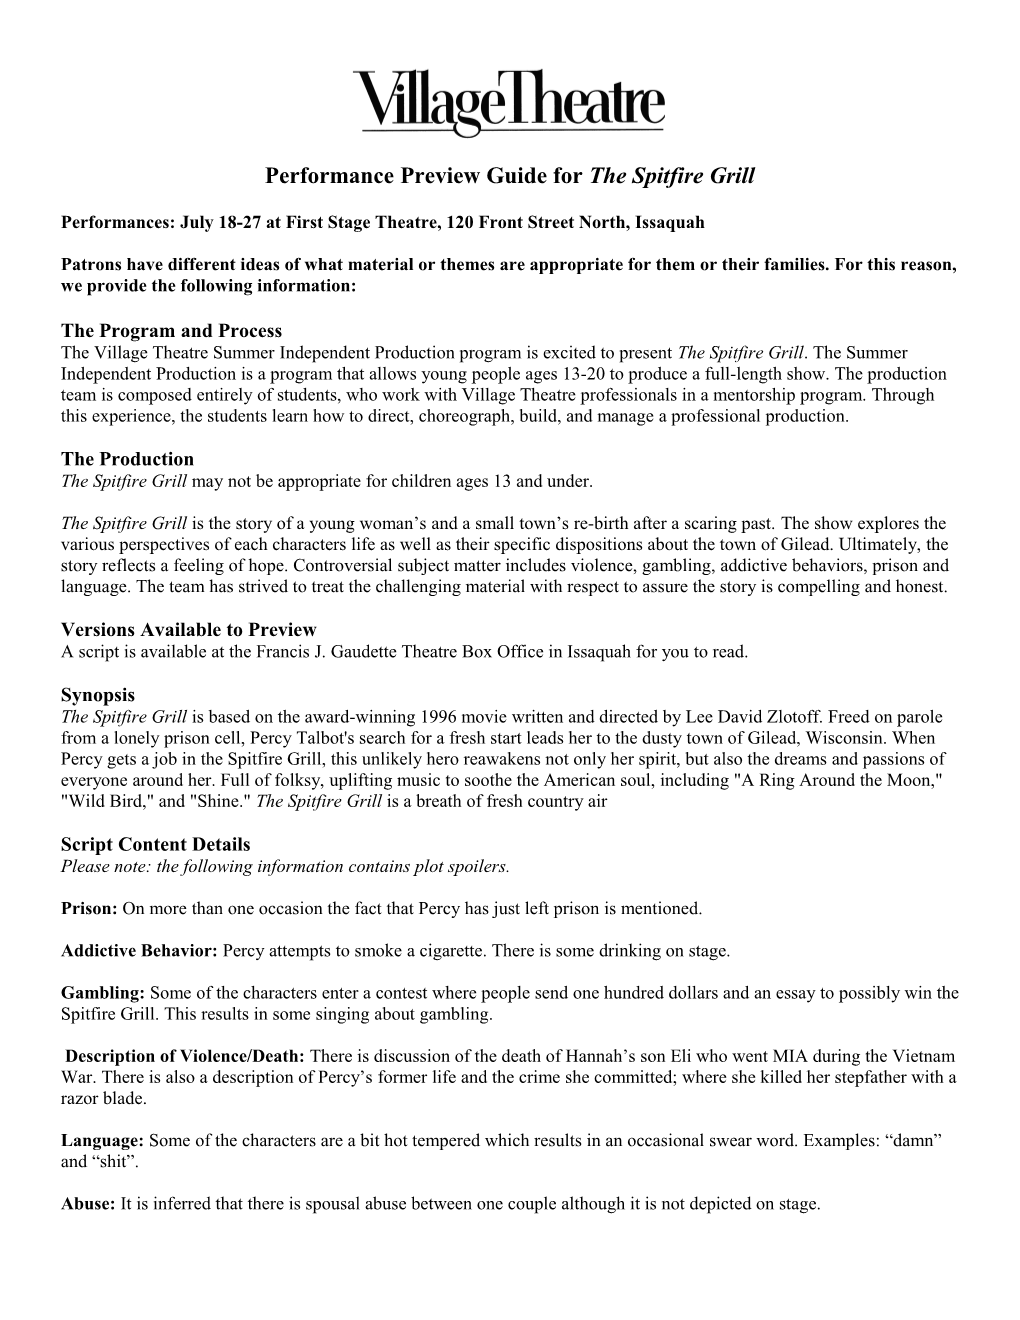 Performance Preview Guide for the Spitfire Grill